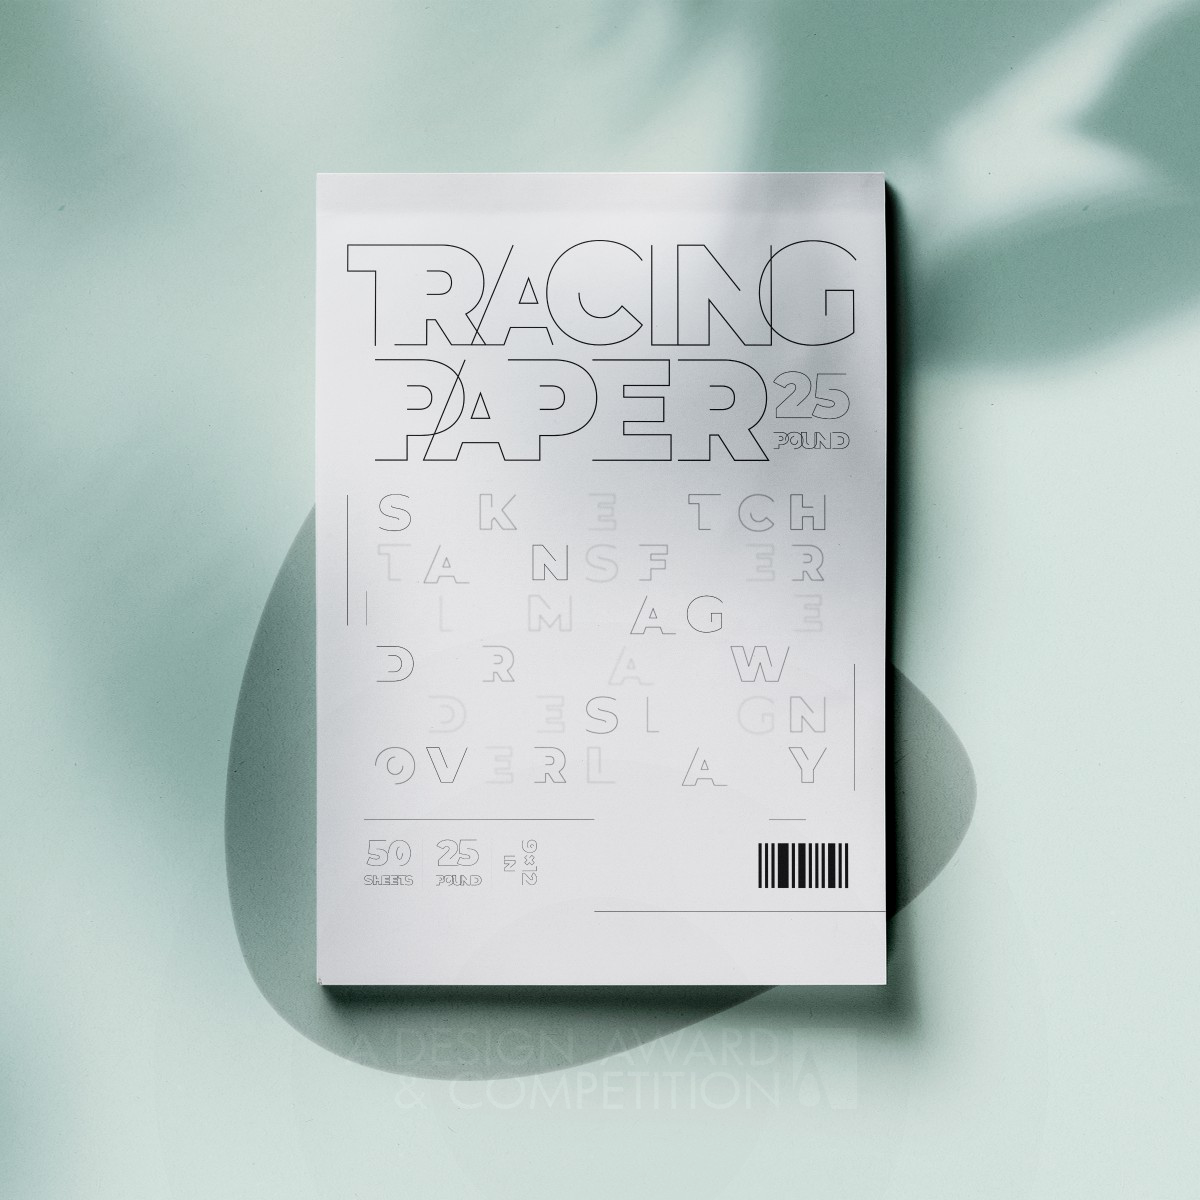 Tracing Package Typography by Yichen Wang